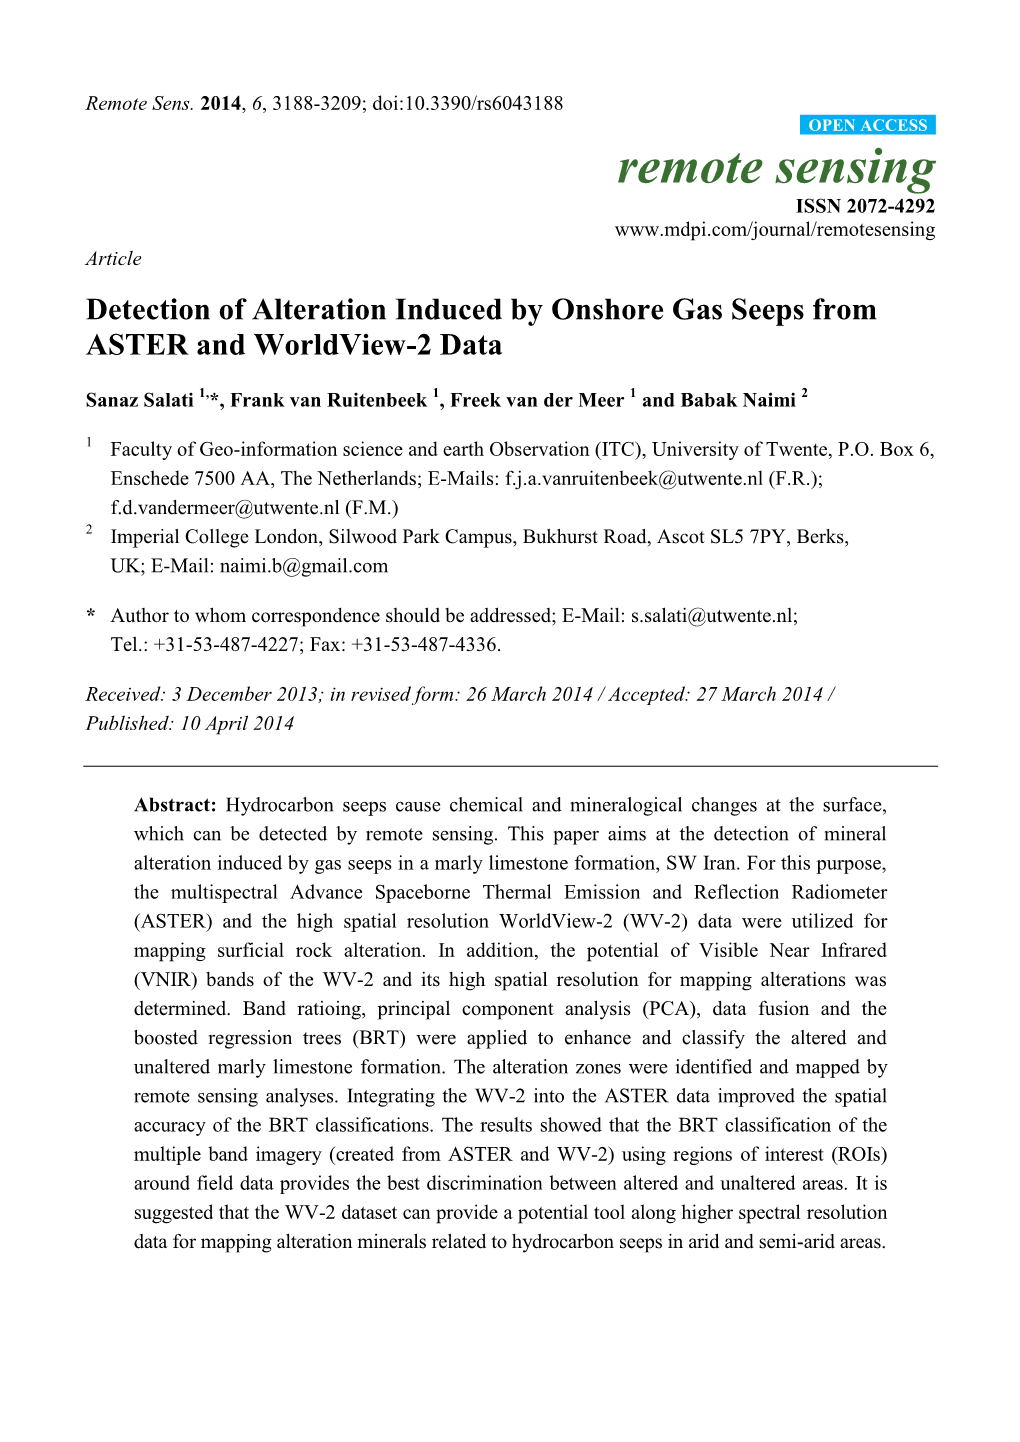 Remote Sensing ISSN 2072-4292 Article Detection of Alteration Induced by Onshore Gas Seeps from ASTER and Worldview-2 Data